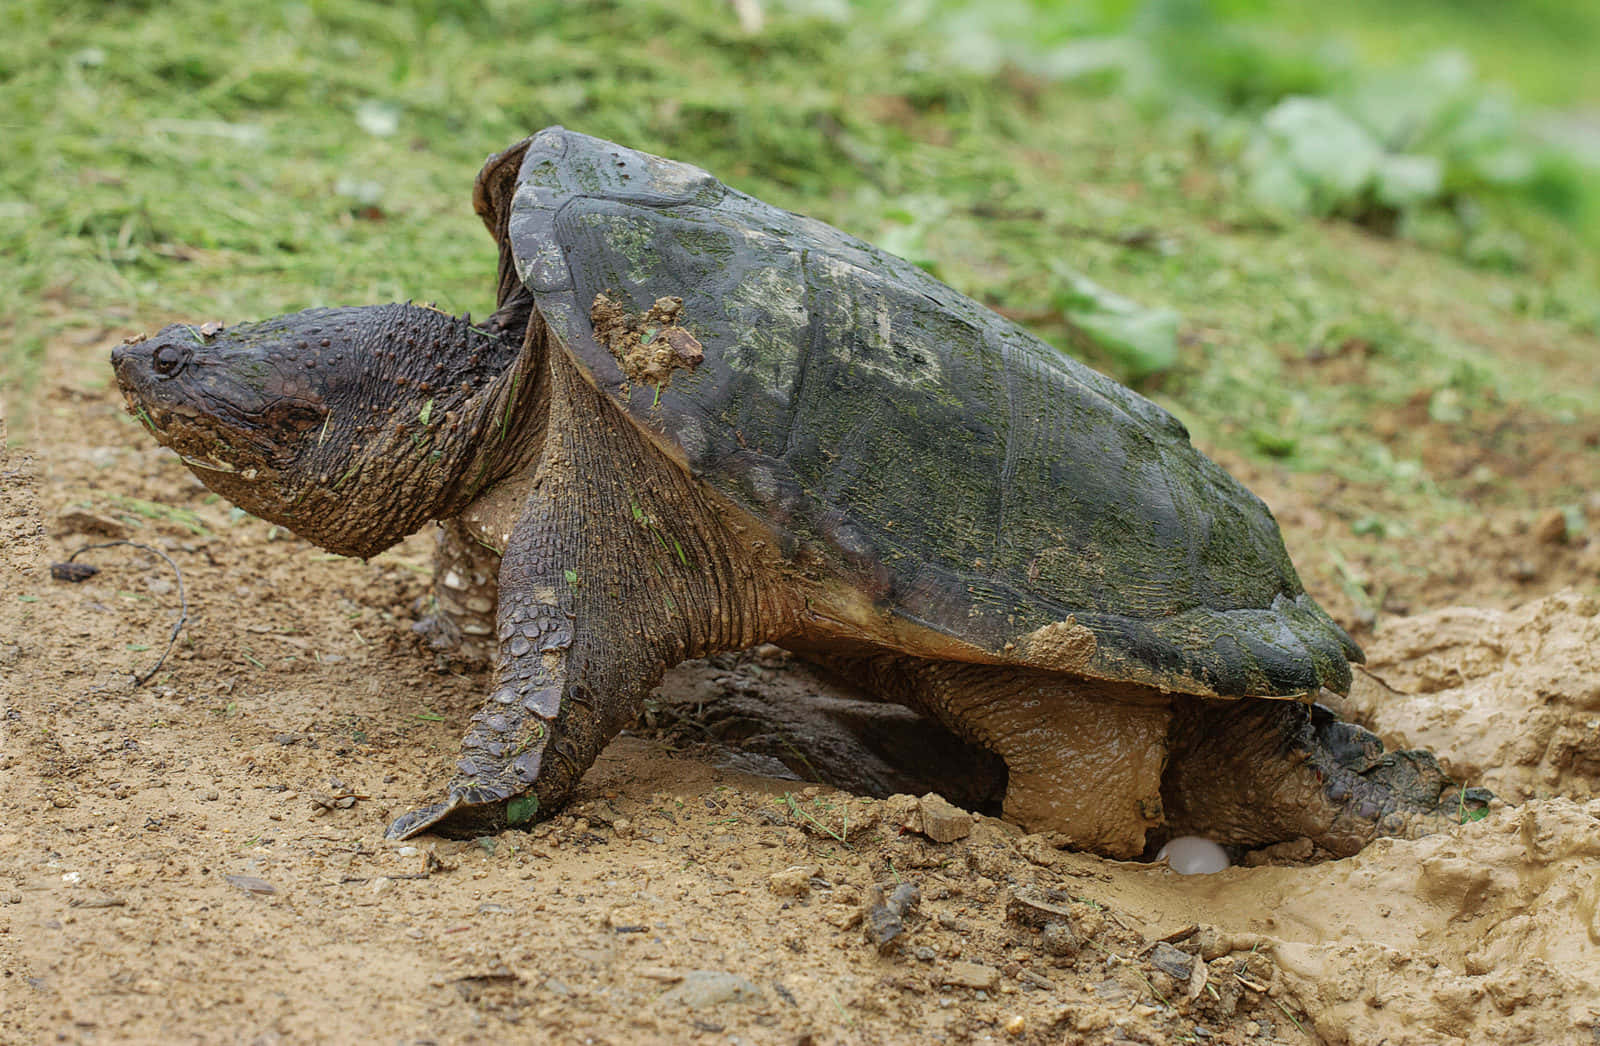 Snapping Turtle Emerging From Burrow.jpg Wallpaper